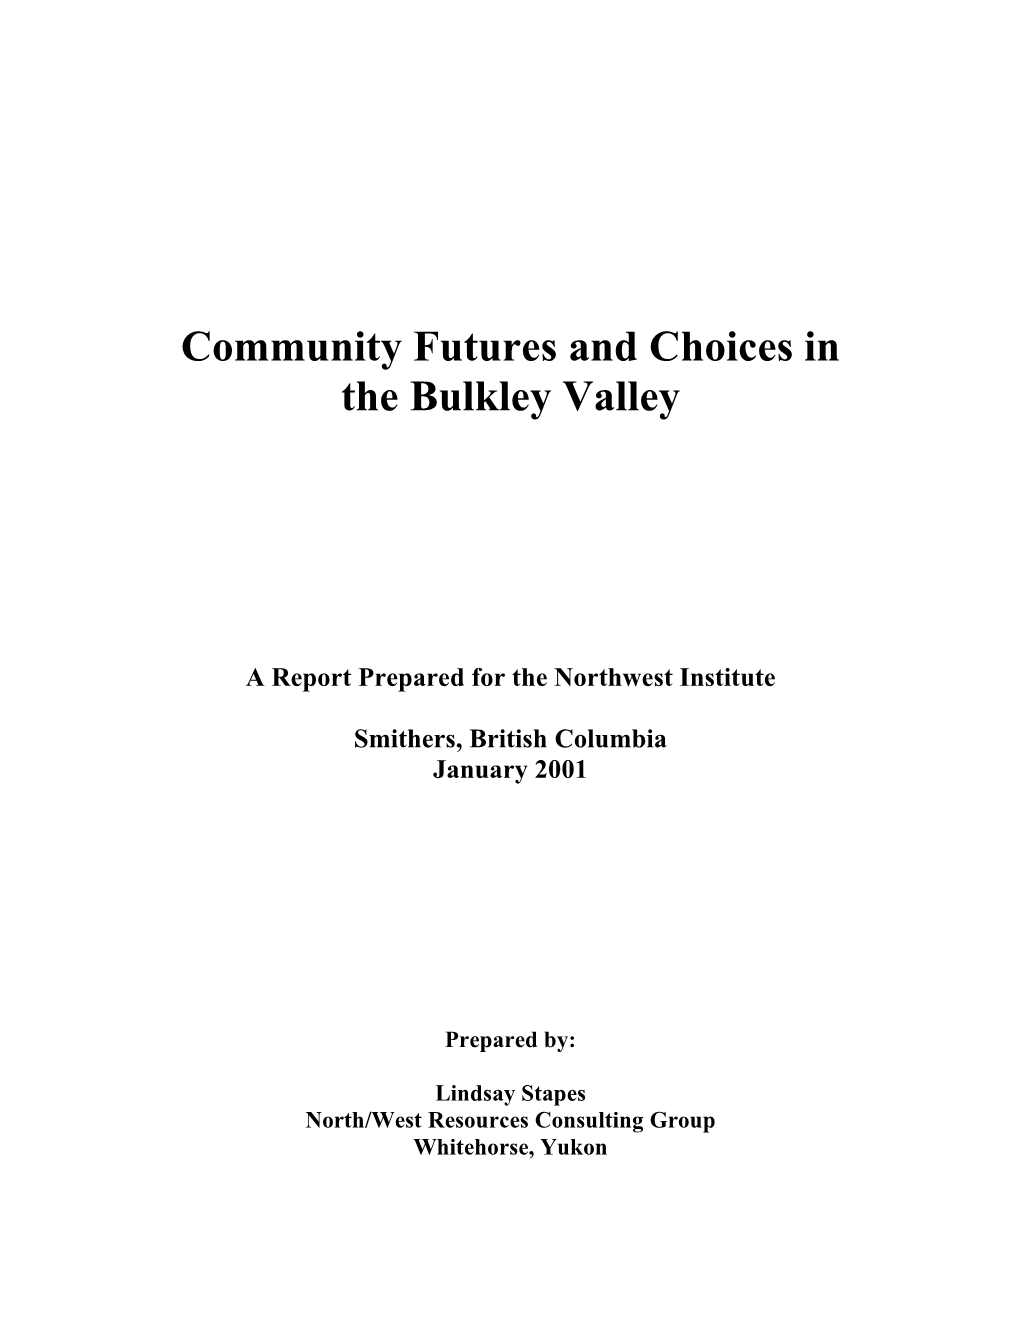 Community Futures and Choices in the Bulkley Valley